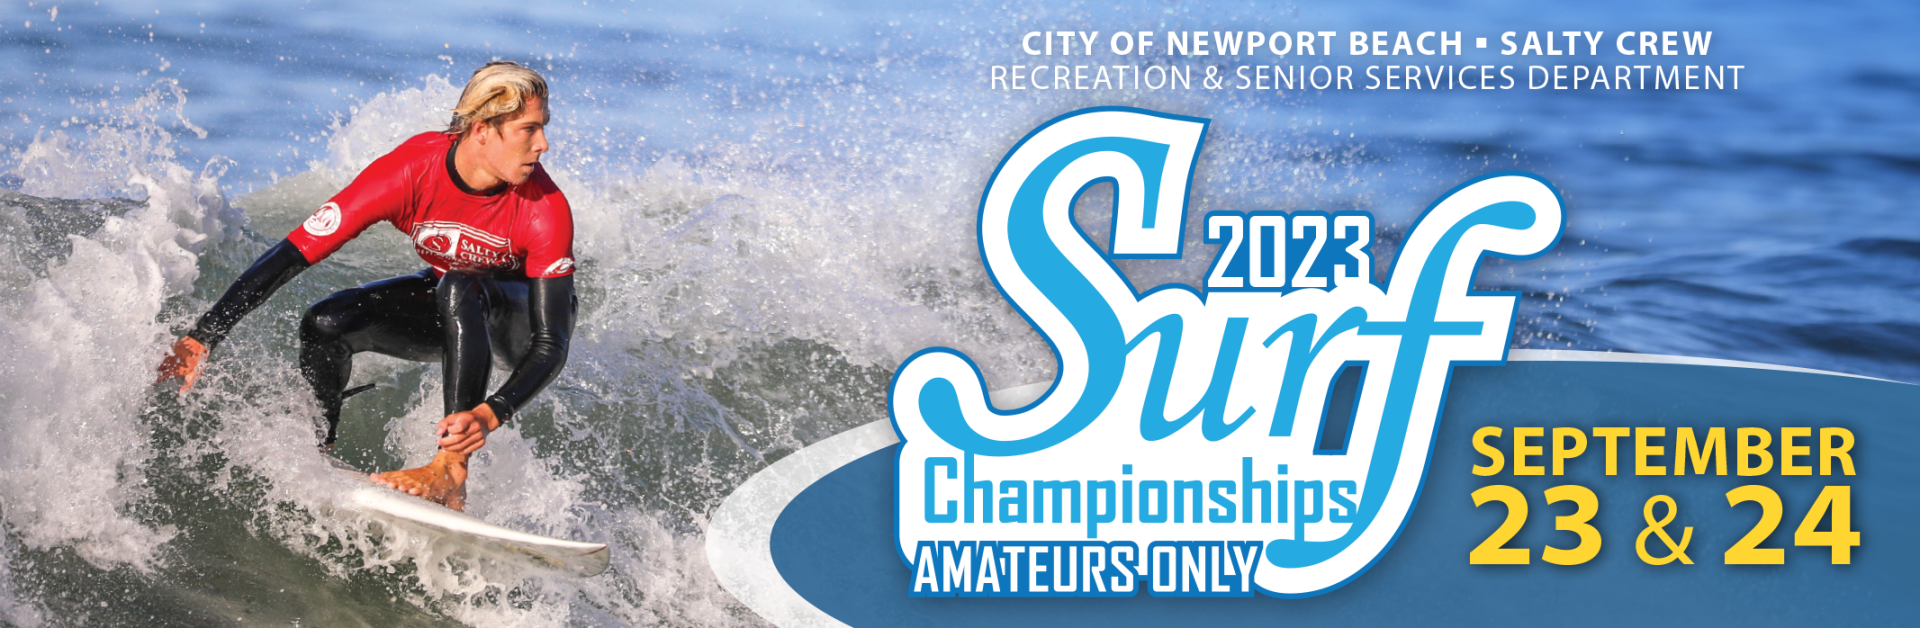 2022 Surf Championships Amateurs Only